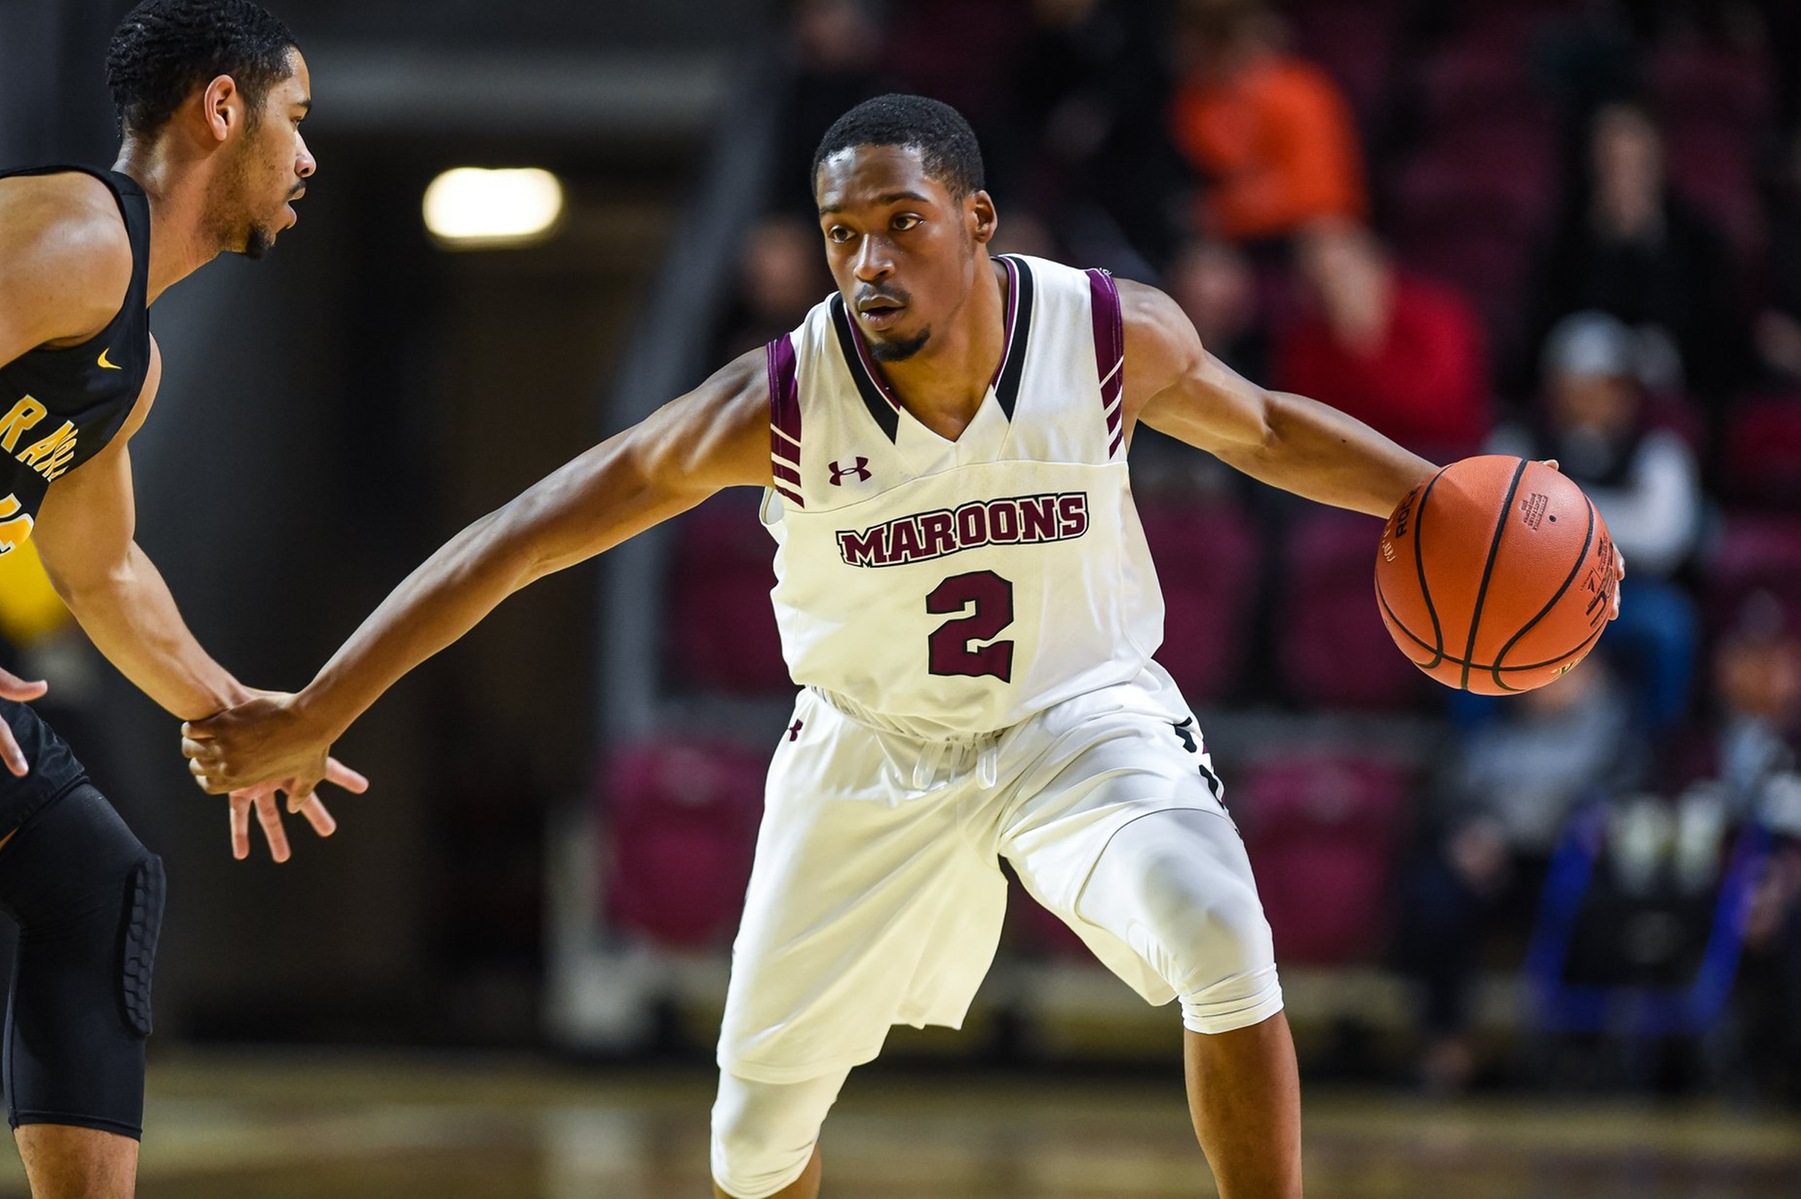 Caleb Jordan led four Maroons in double-figures with 20 points as Roanoke topped rival Lynchburg 81-44.